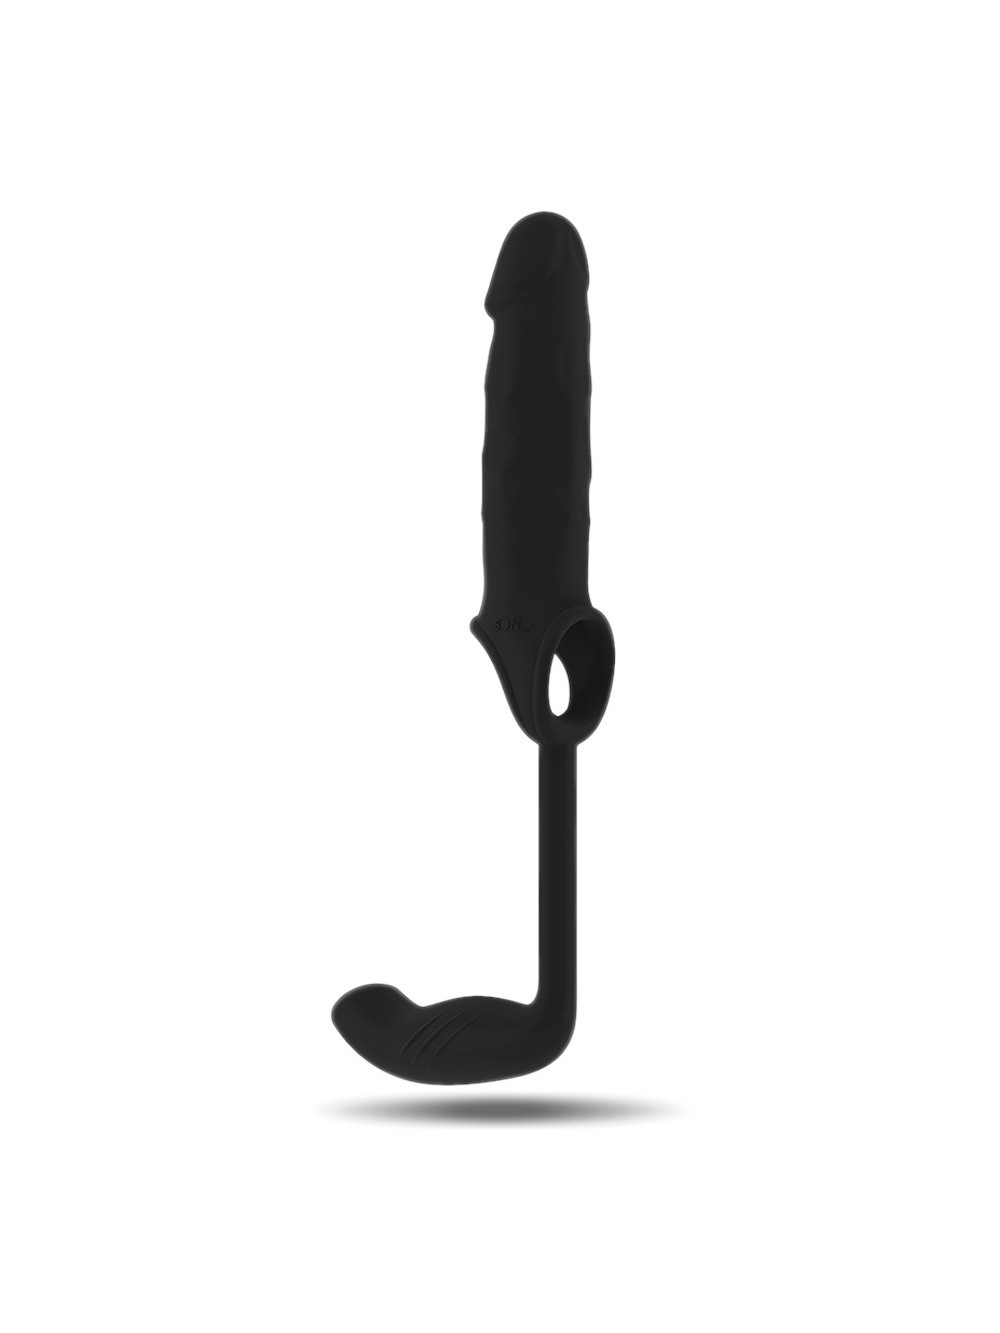 SONO N34 PENIS SLEEVE WITH EXTENSION AND ANAL PLUG BLACK